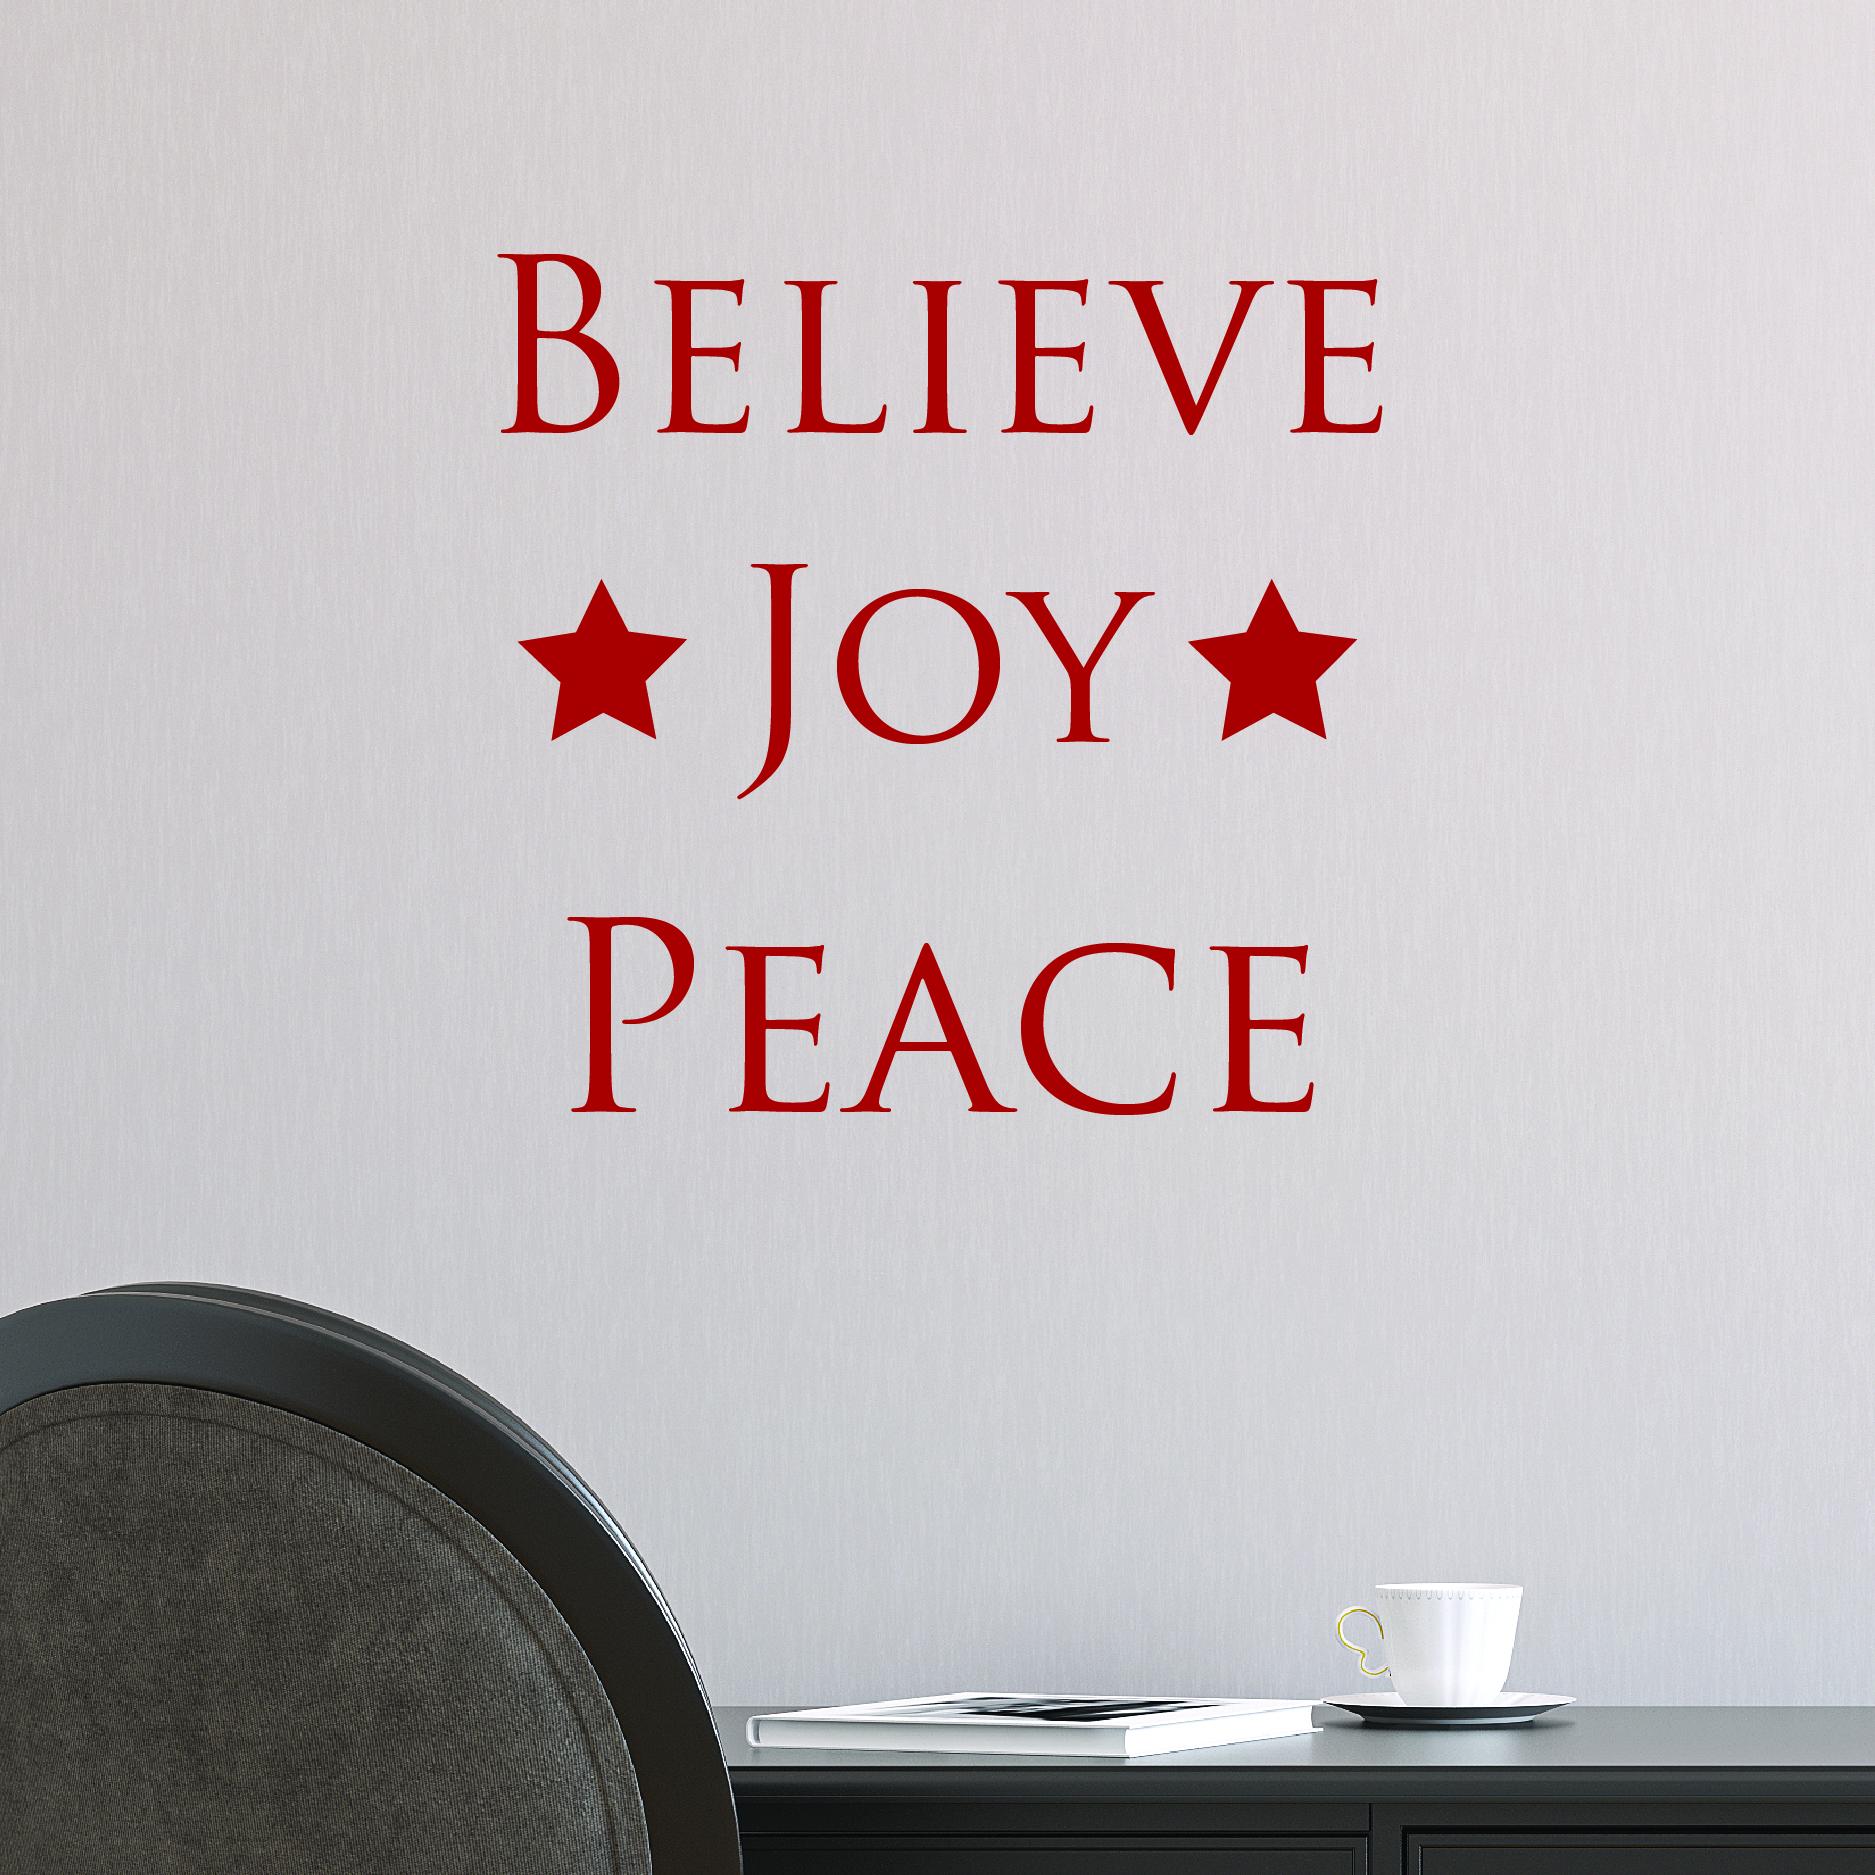 Believe Joy Peace Wall Quotes™ Decal | WallQuotes.com